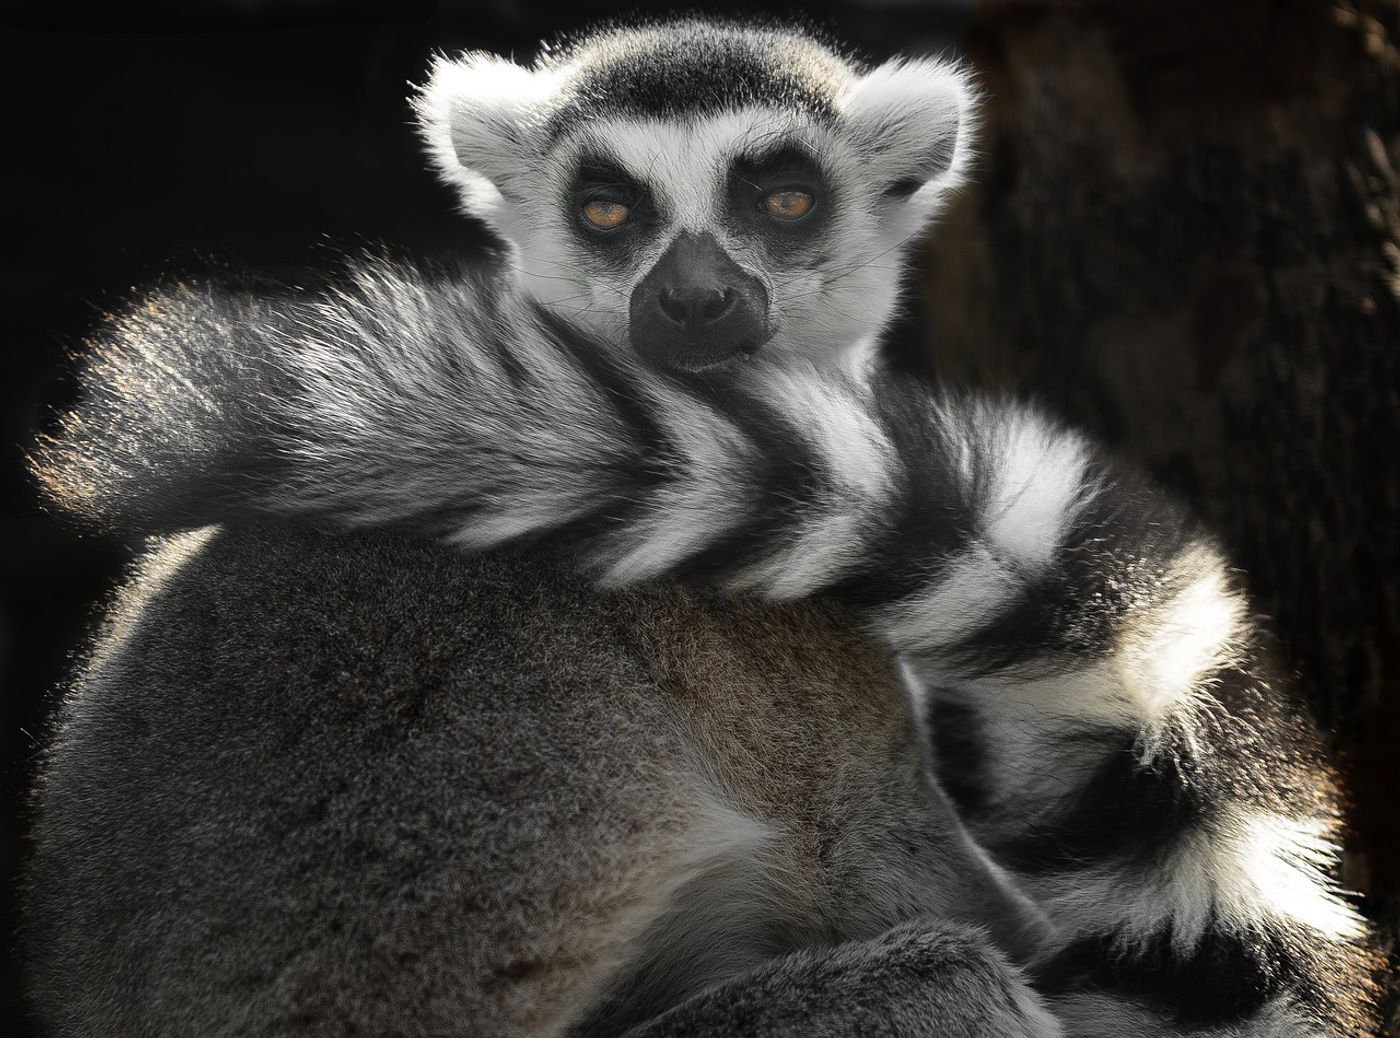 Ring-tailed lemurs are unique in the way they look. Their bushy tails might even serve as a way to attract mates.